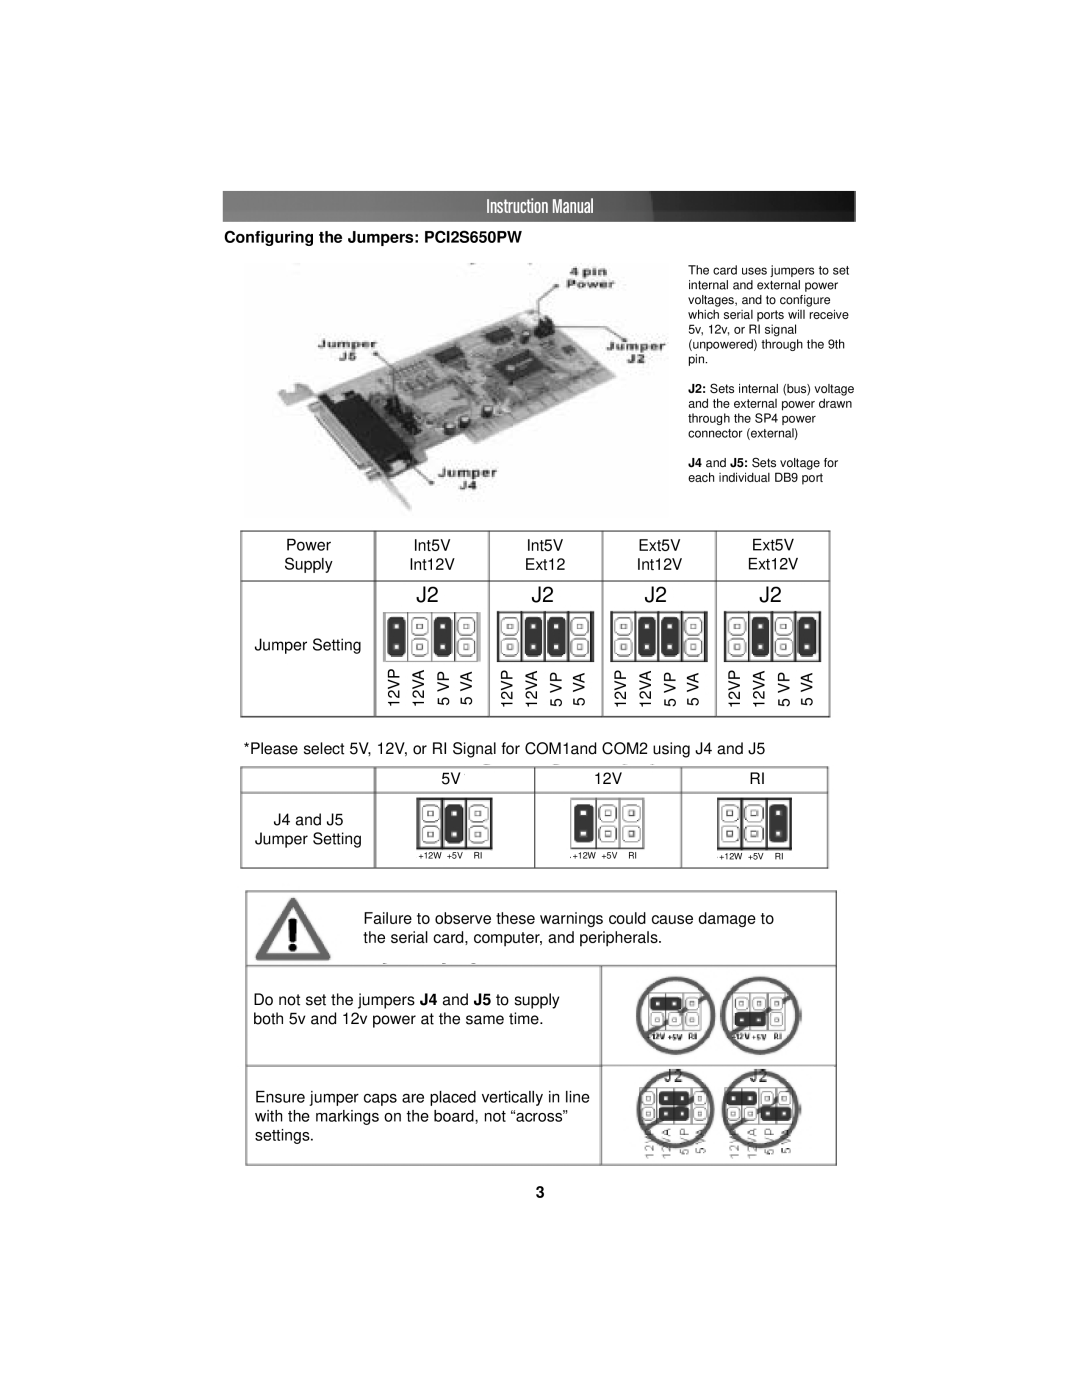 StarTech.com PCI4S650PW Instruction Manual, Configuring the Jumpers PCI2S650PW, J4 and J5, Jumper Setting 